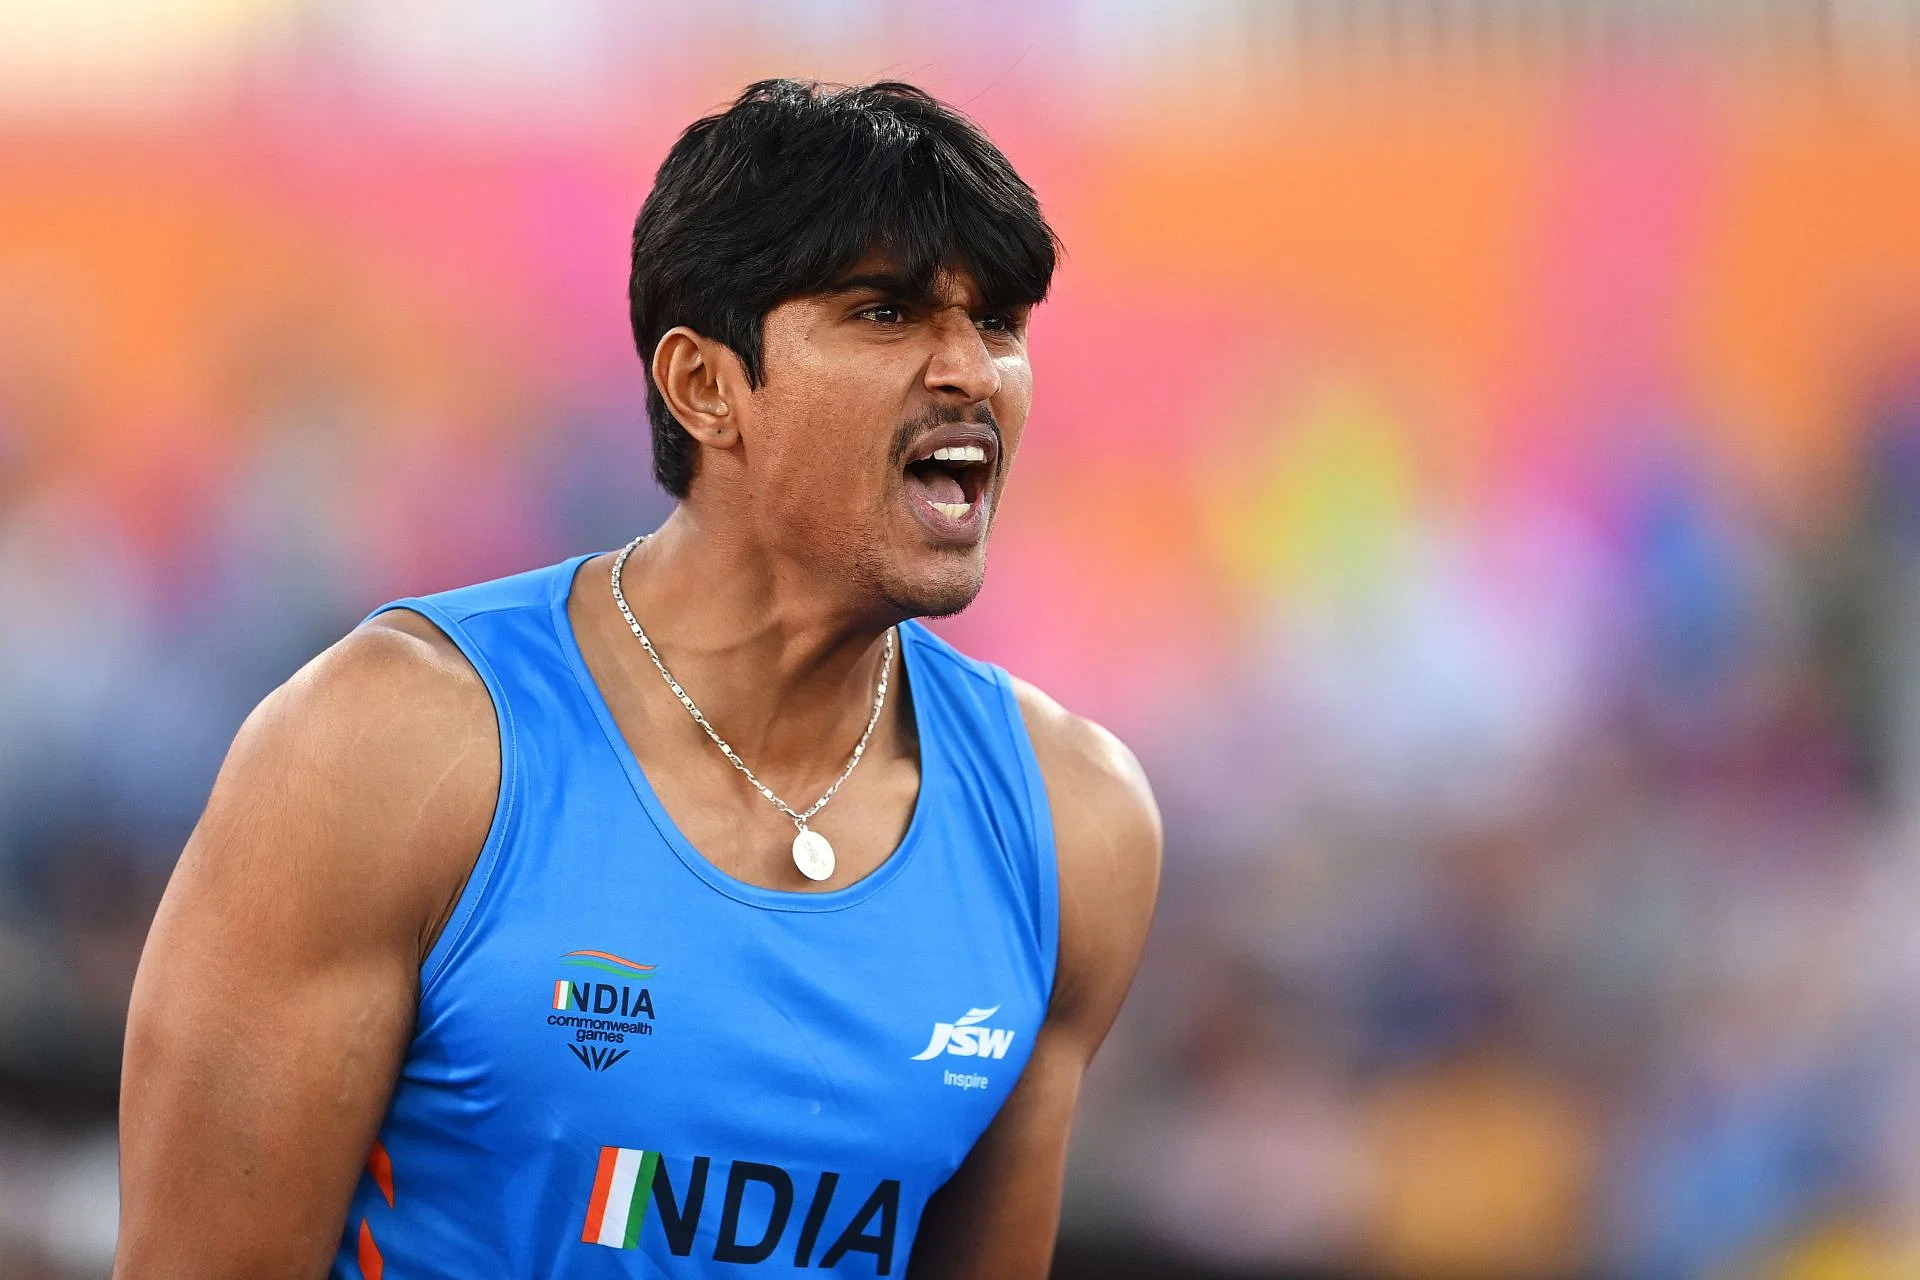 Javelin thrower DP Manu set for Training in South Africa